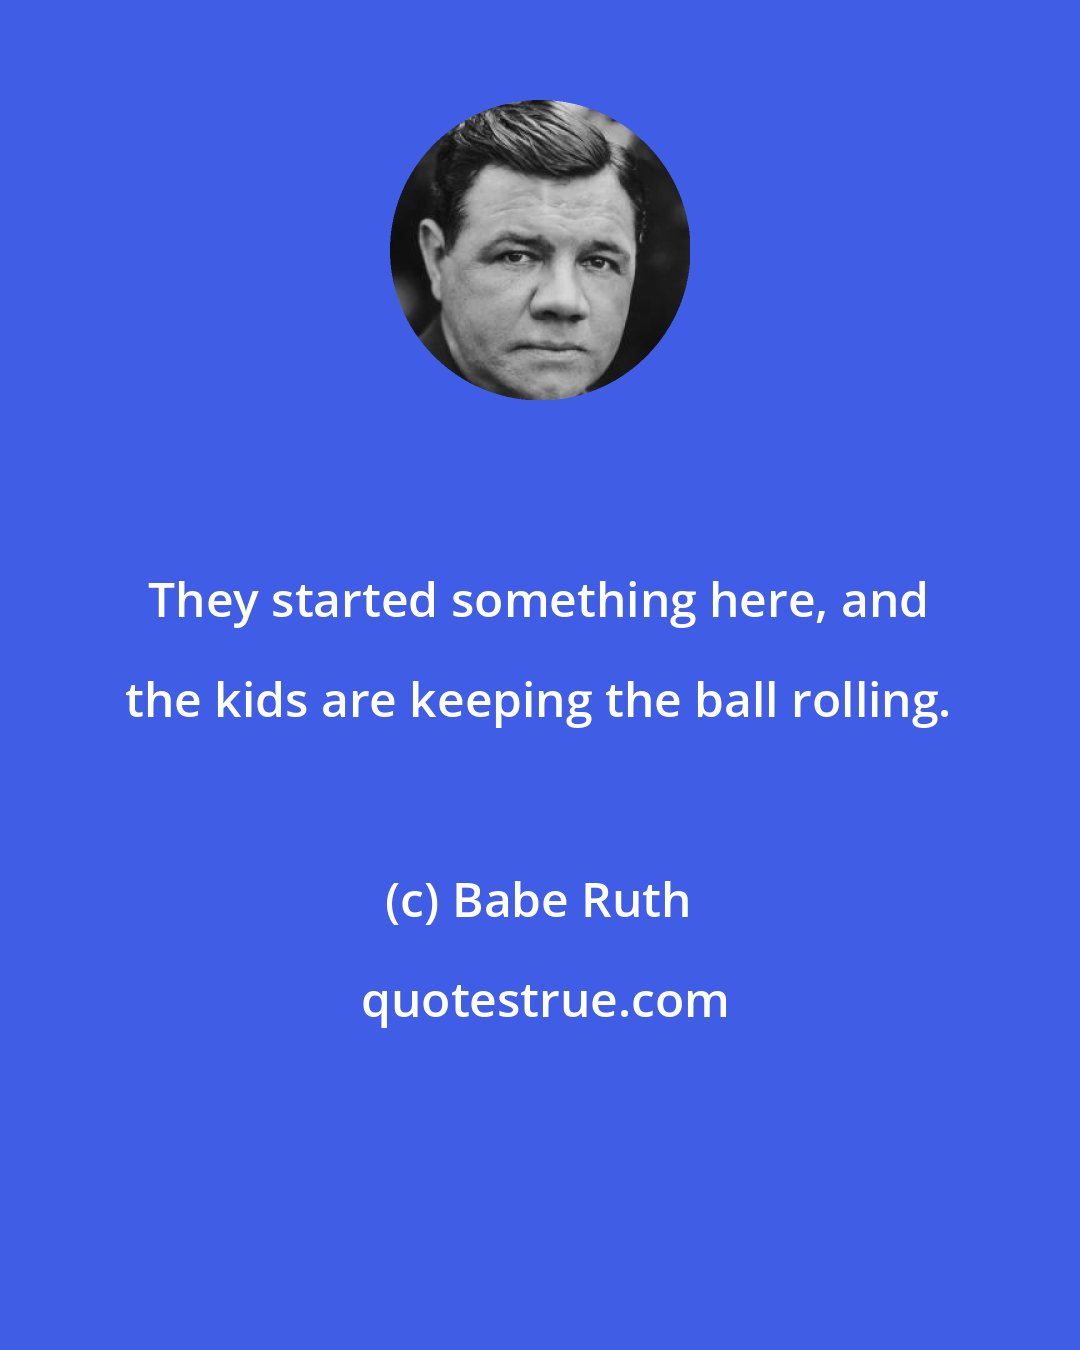 Babe Ruth: They started something here, and the kids are keeping the ball rolling.